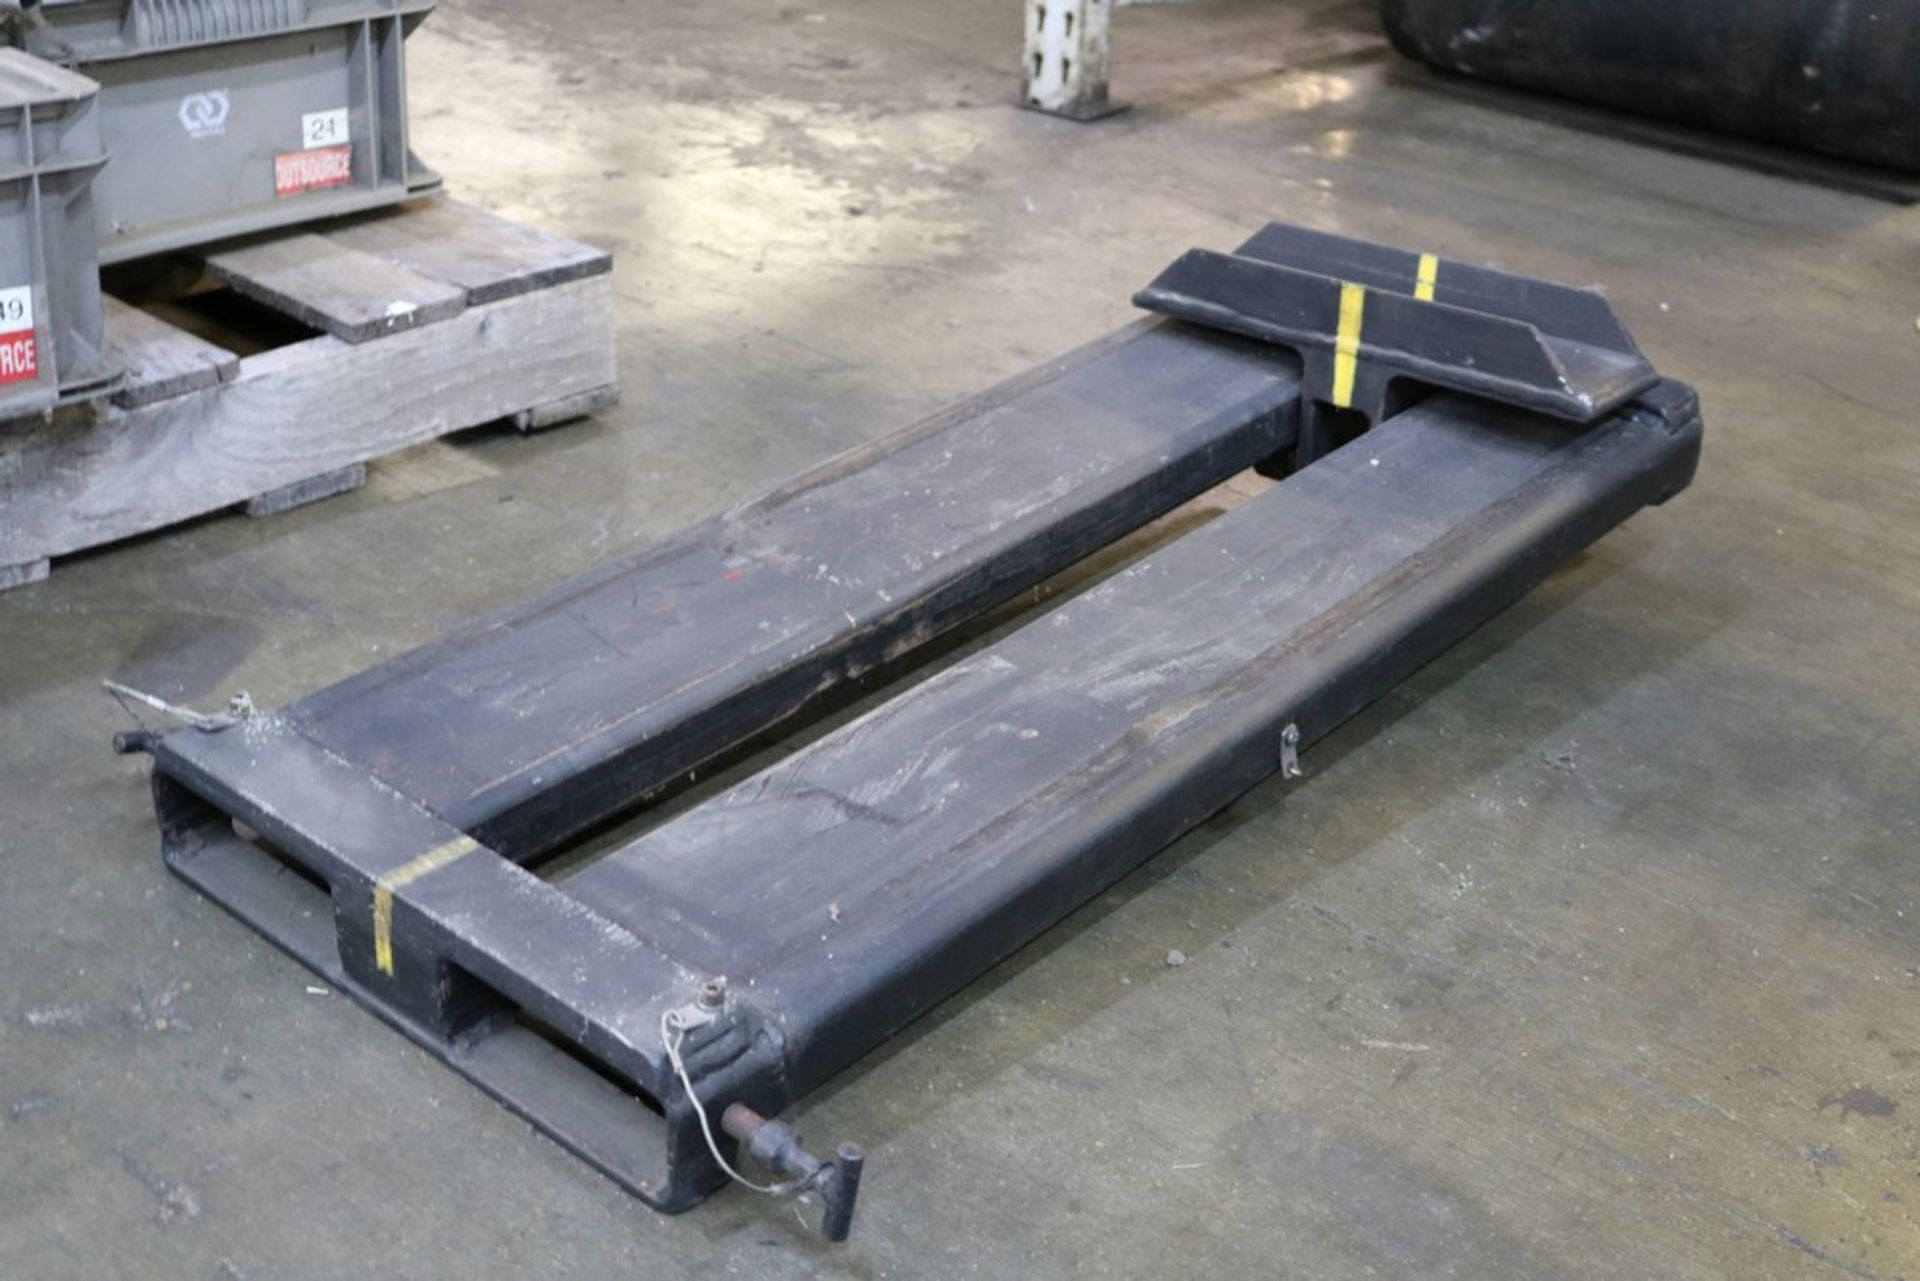 Forklift Mold Lifter Attachment